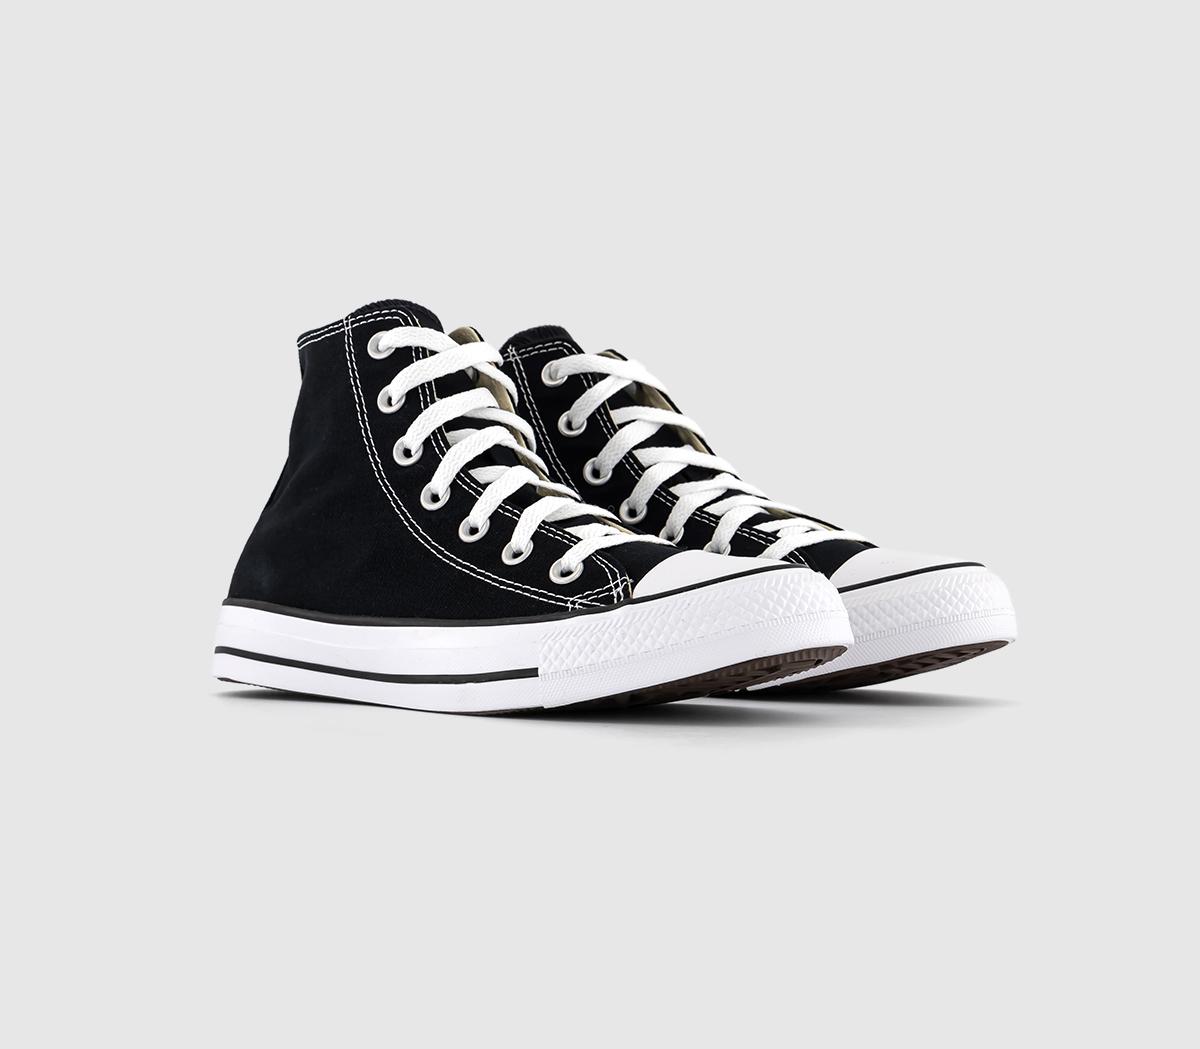 Converse All Star High Top Black And White Canvas Printed Classic Trainers, 6